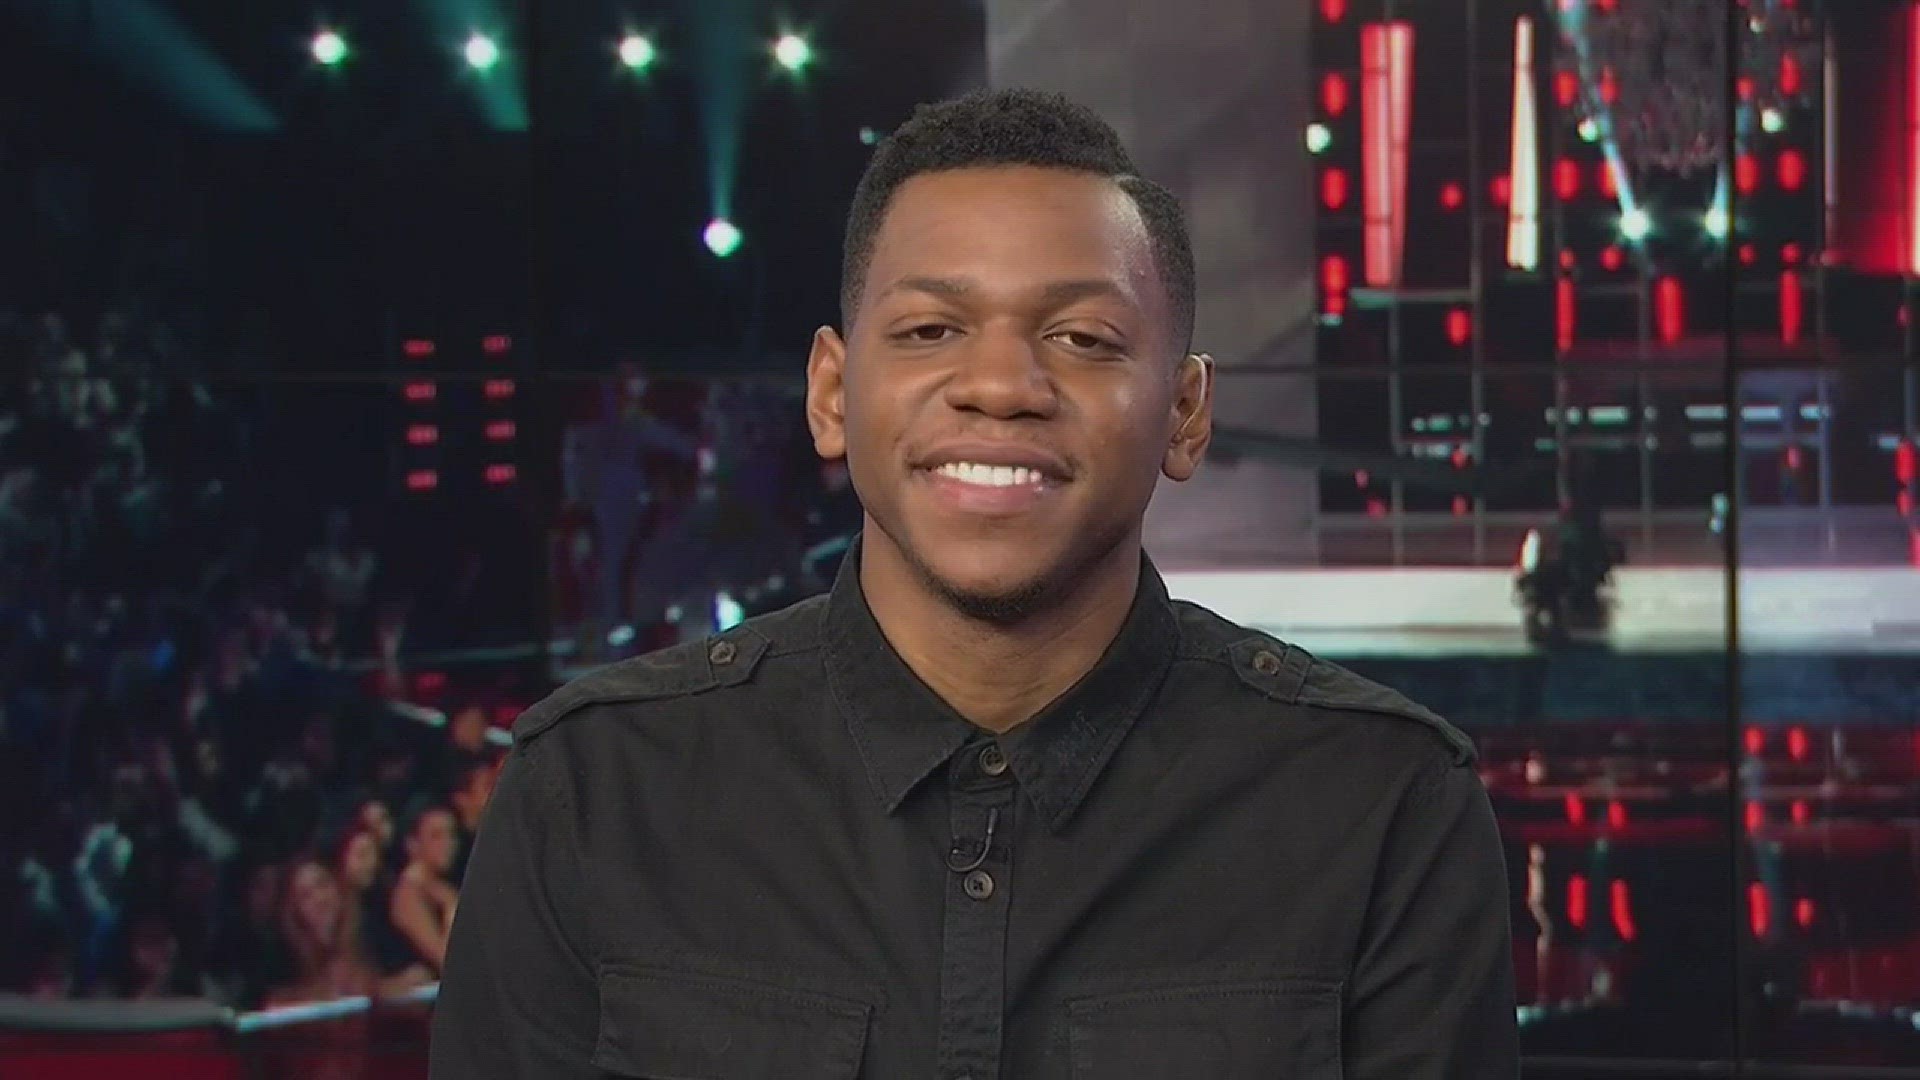 April 21, 2017: WBIR 10News anchor Katie Roach talks with Chris Blue about the live elimination rounds on The Voice, handling his nerves and his message to fans in Knoxville.